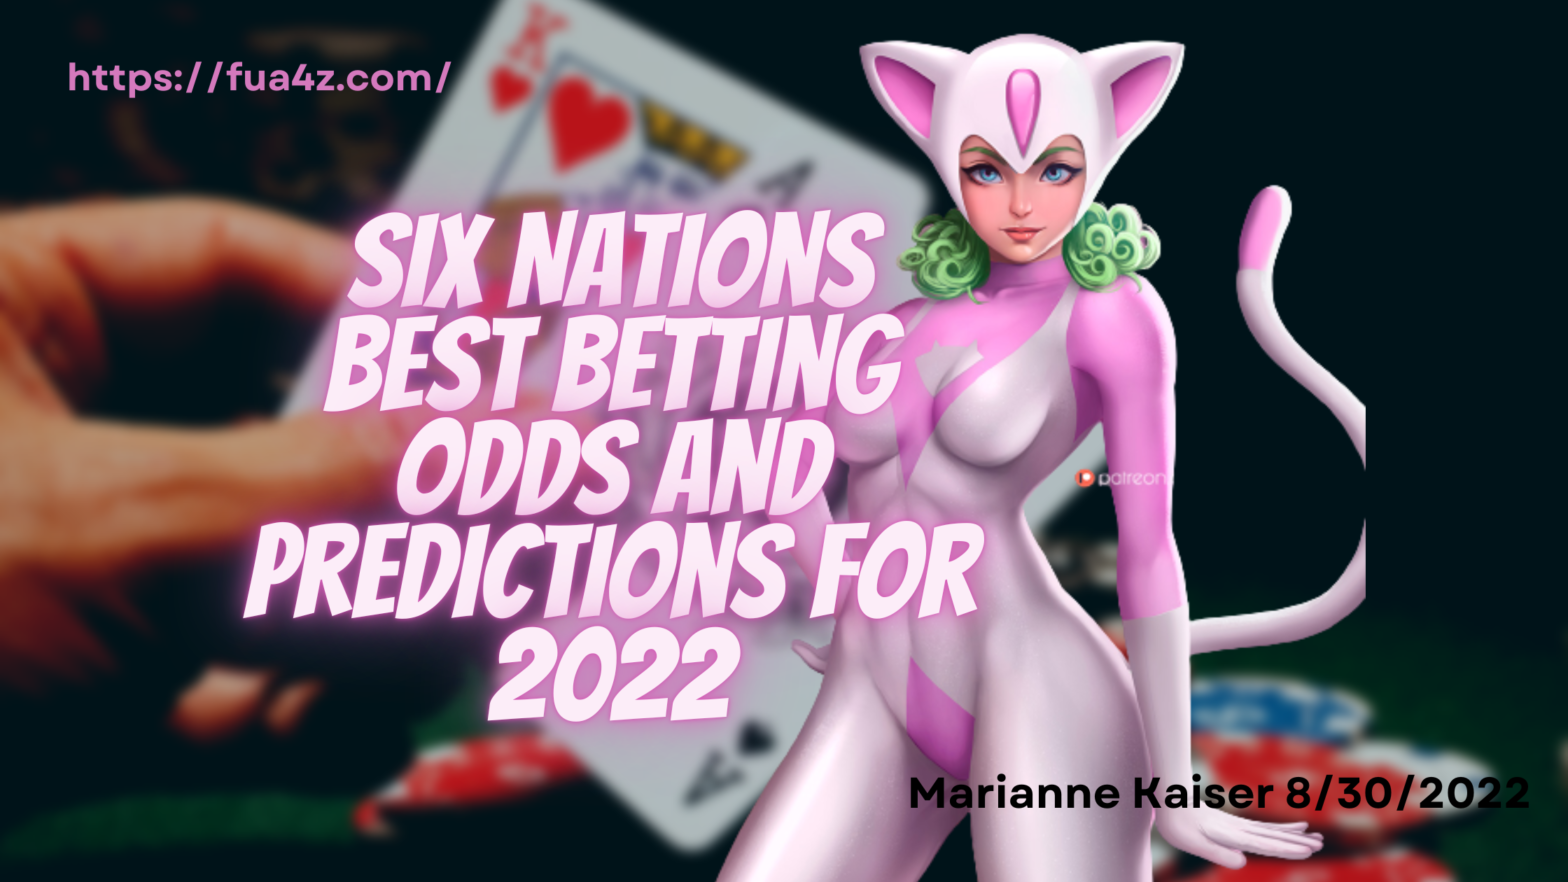 Six Nations Best Betting Odds and Predictions for 2022